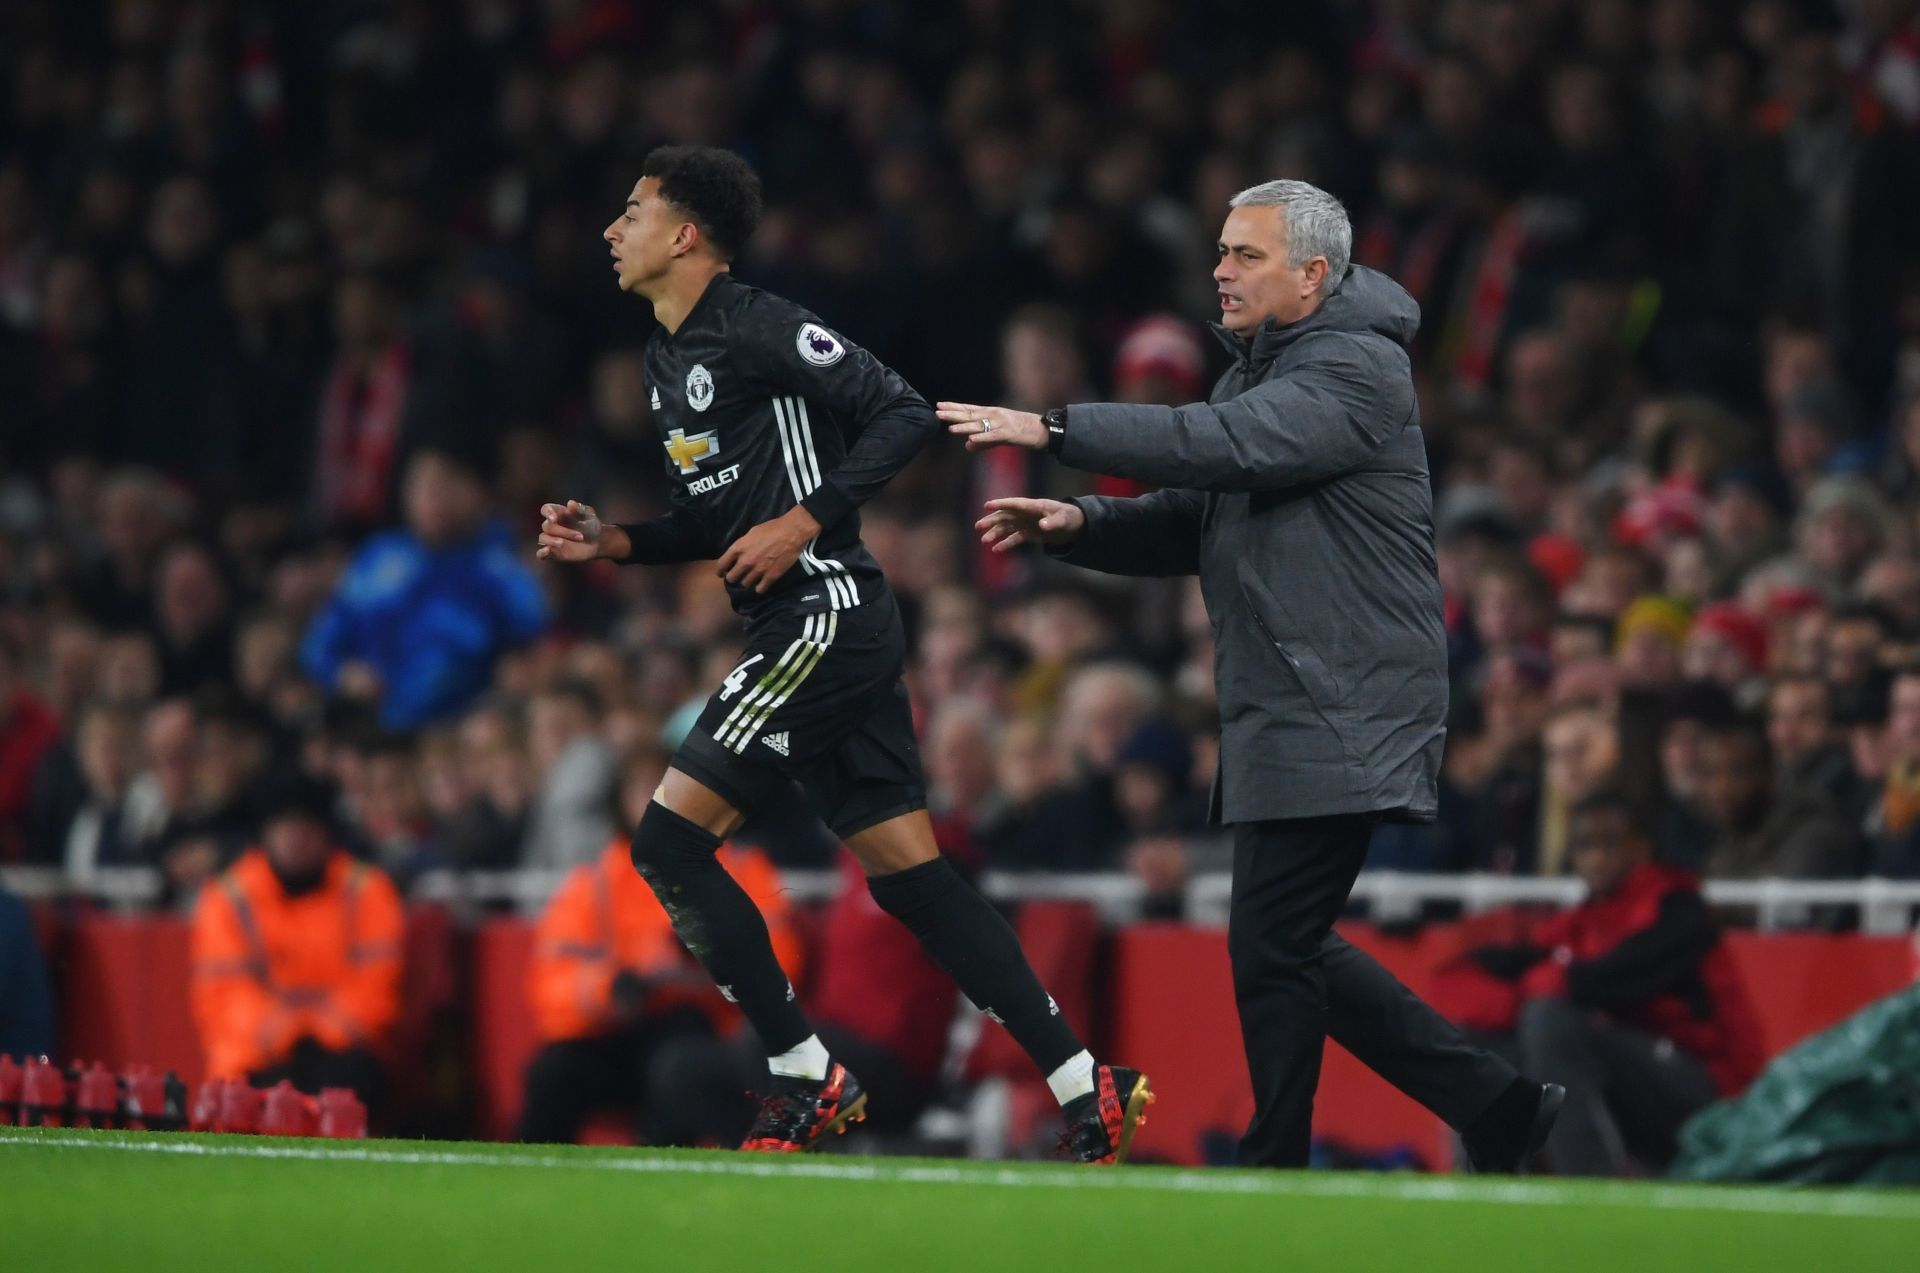 Lingard and Mourinho have a storied past.